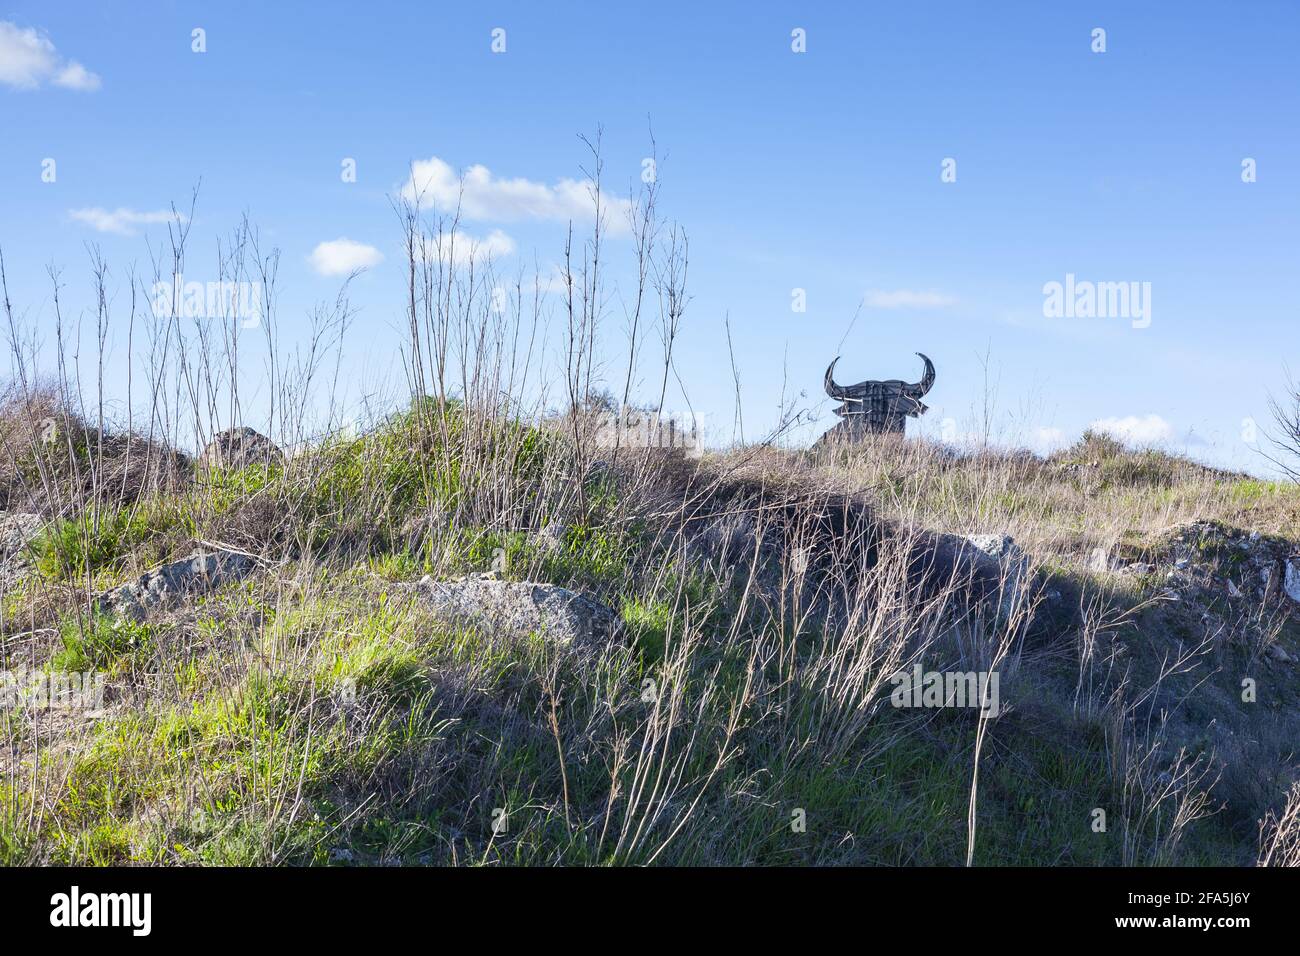 PLASENCIA, SPAIN - Apr 22, 2021: Casar de Caceres, Caceres, Spain - February 22, 2021: Silhouette of a bull in the field in Spain, the black bull is a Stock Photo